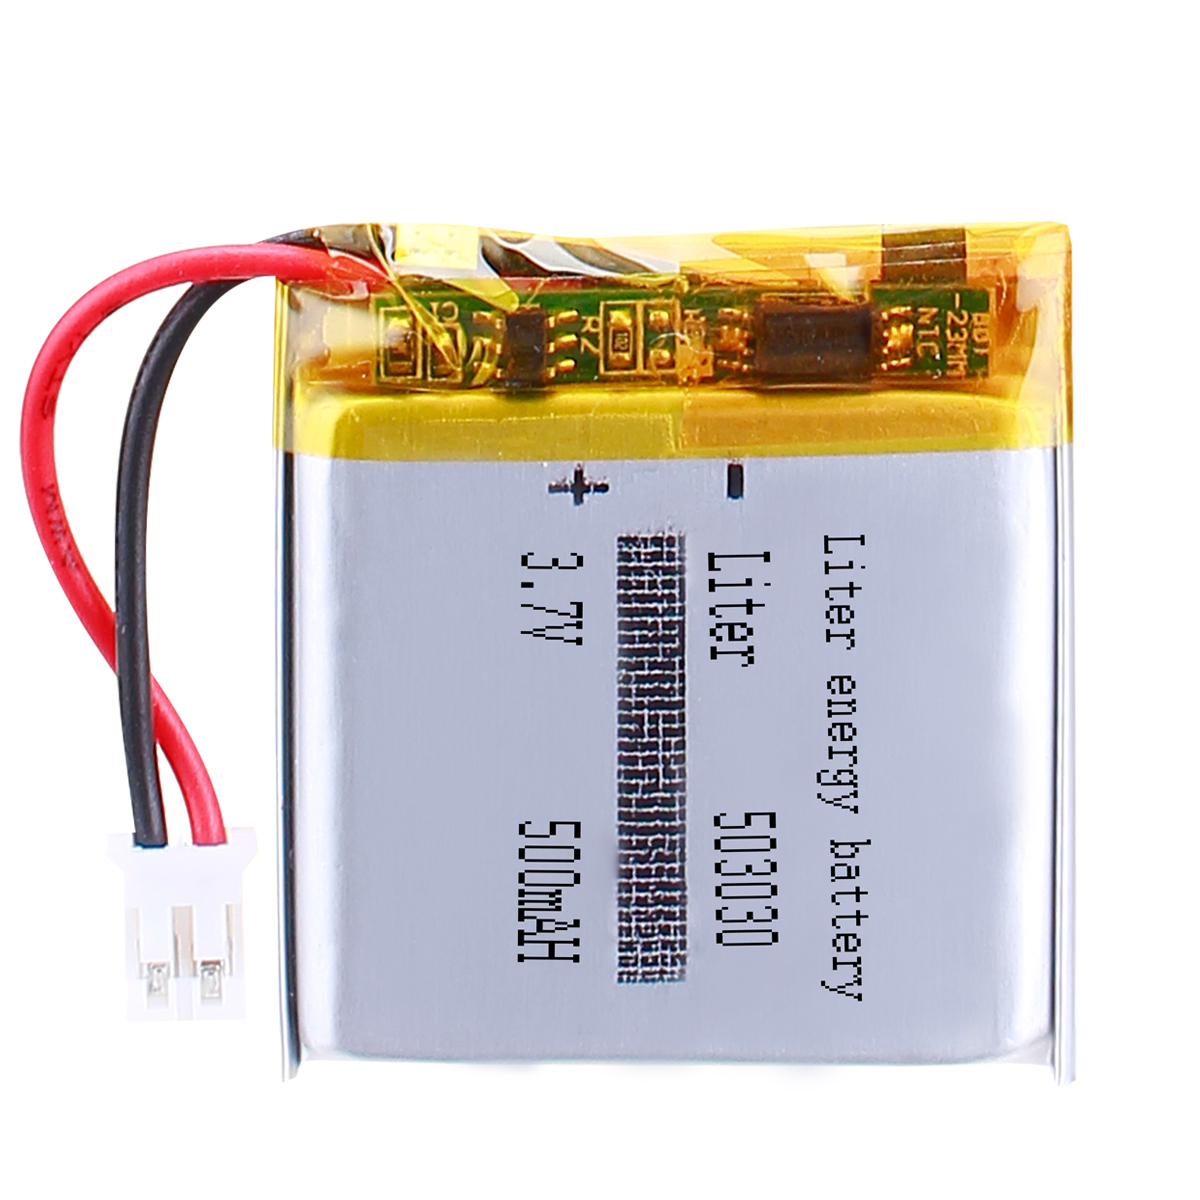 100pcs Lithium Polymer Battery liter 503030 3.7V 500mAh With PCM & Wires